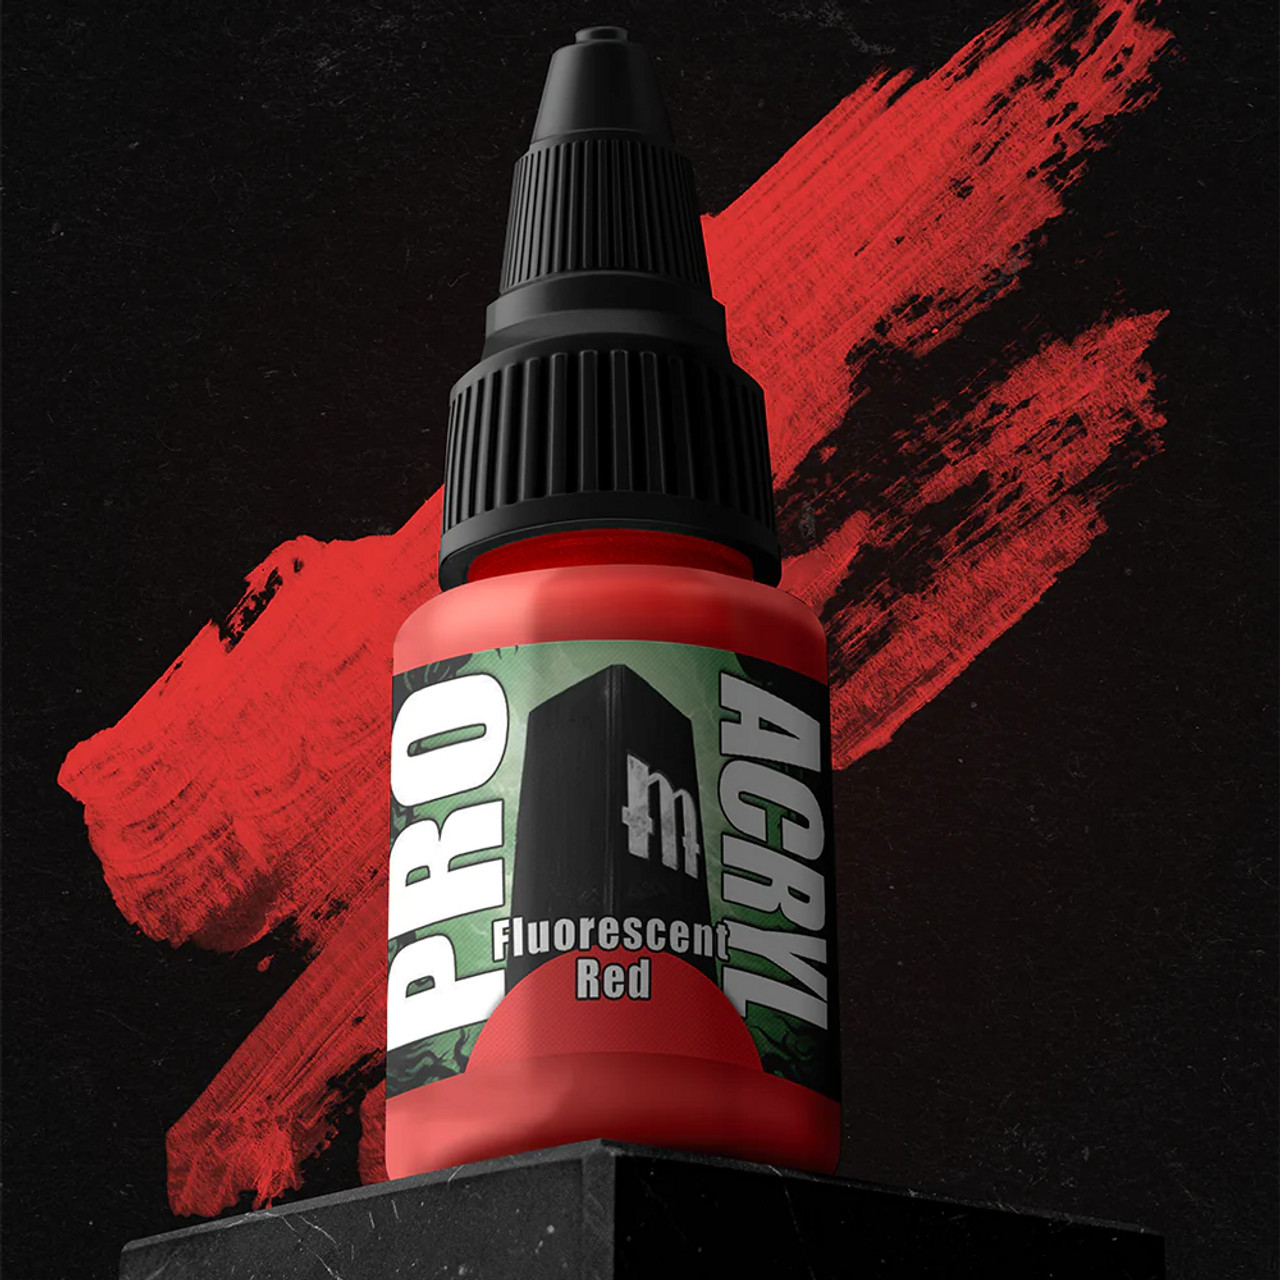 Pro Acryl: Fluorescent Red